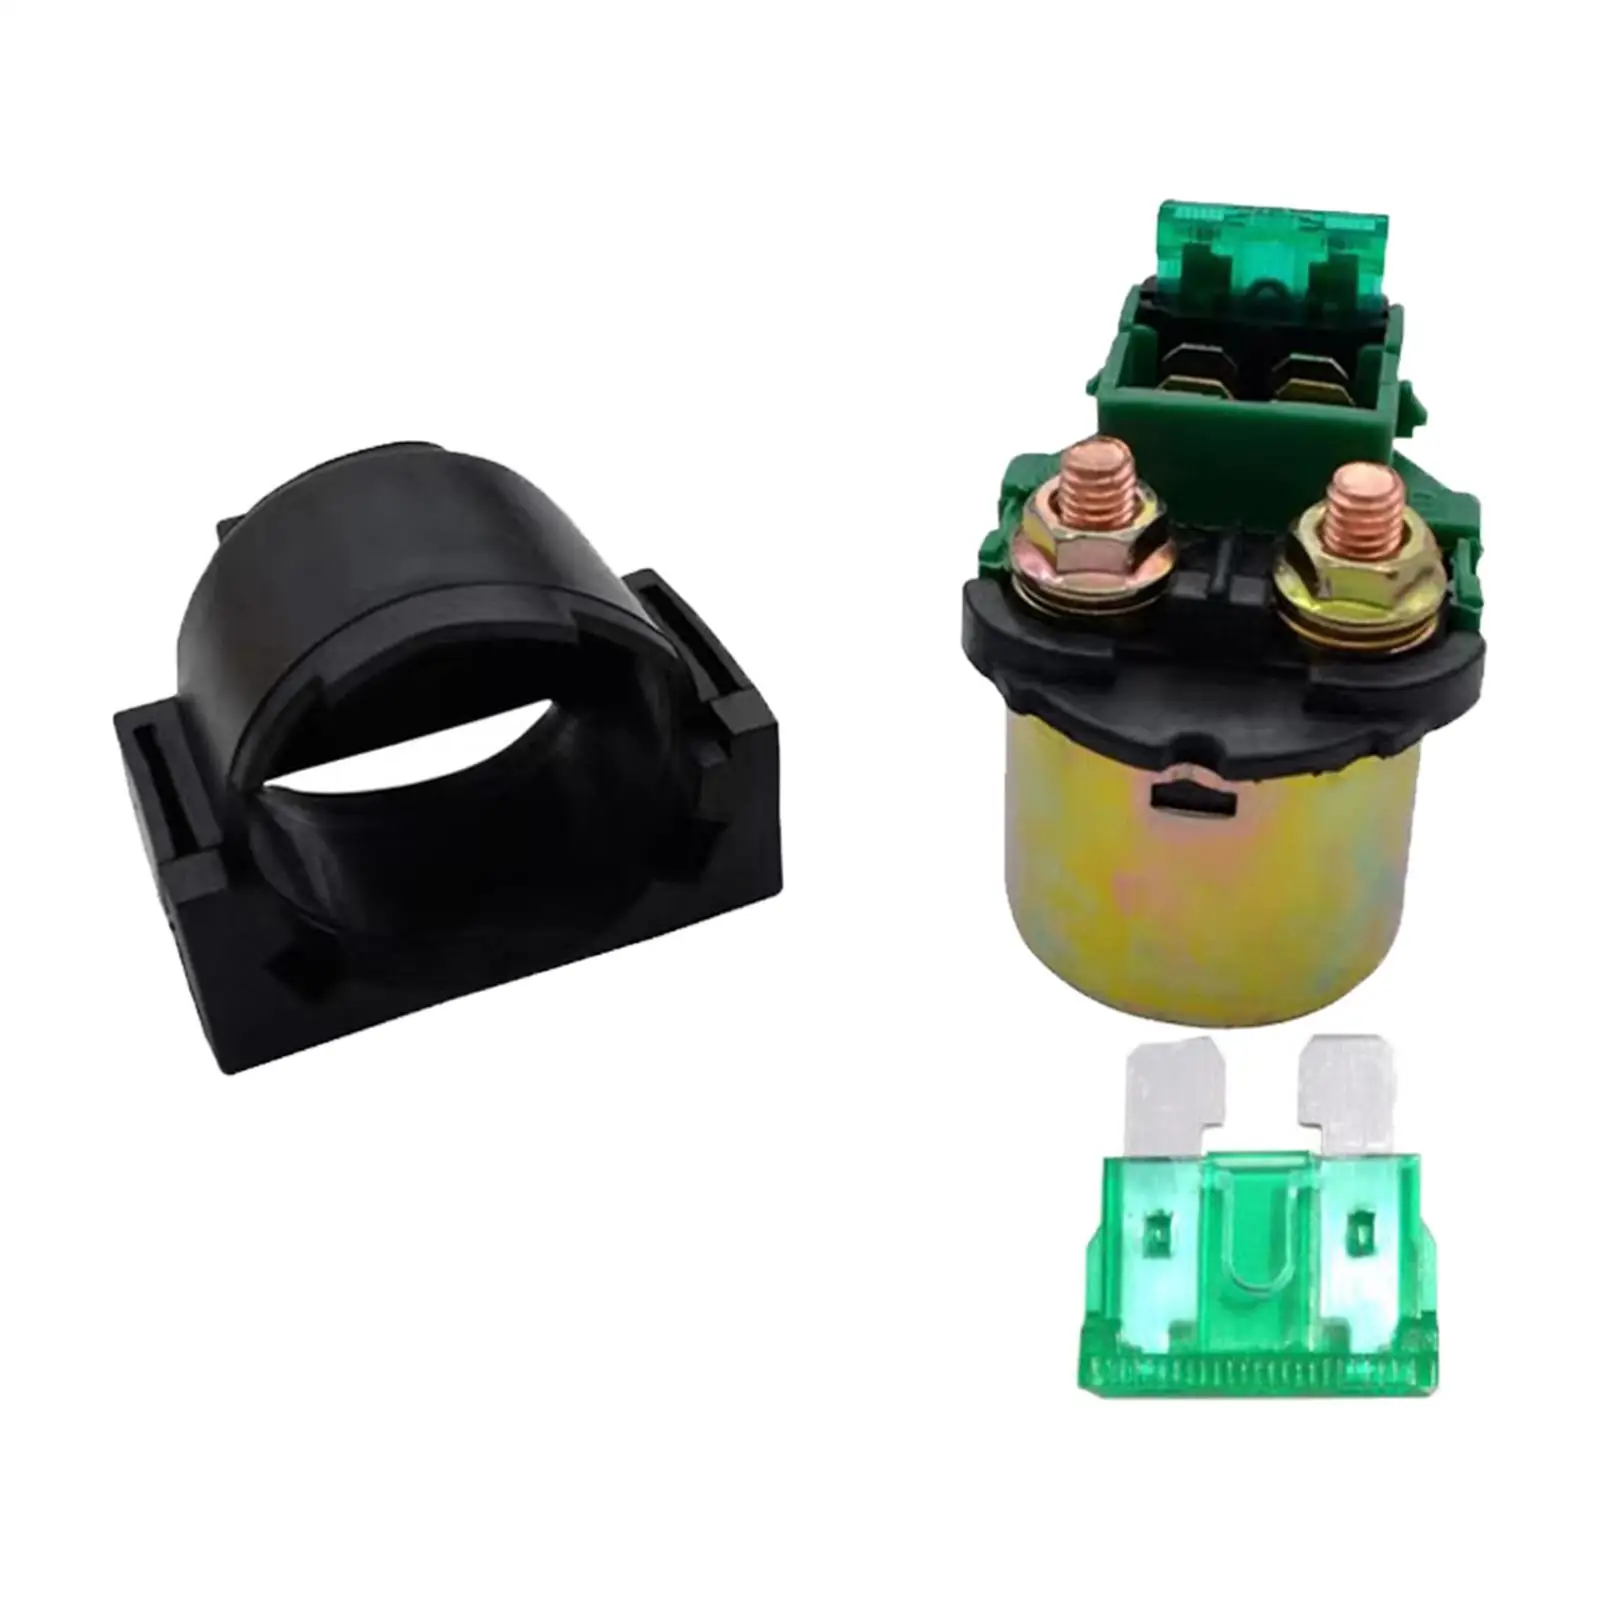 Starter Motor Solenoid Relay Electrical Relay Switch with Fuse Fit for Suzuki GS500 1990-09 Gw250 GSX250R DL250 Parts Supplies